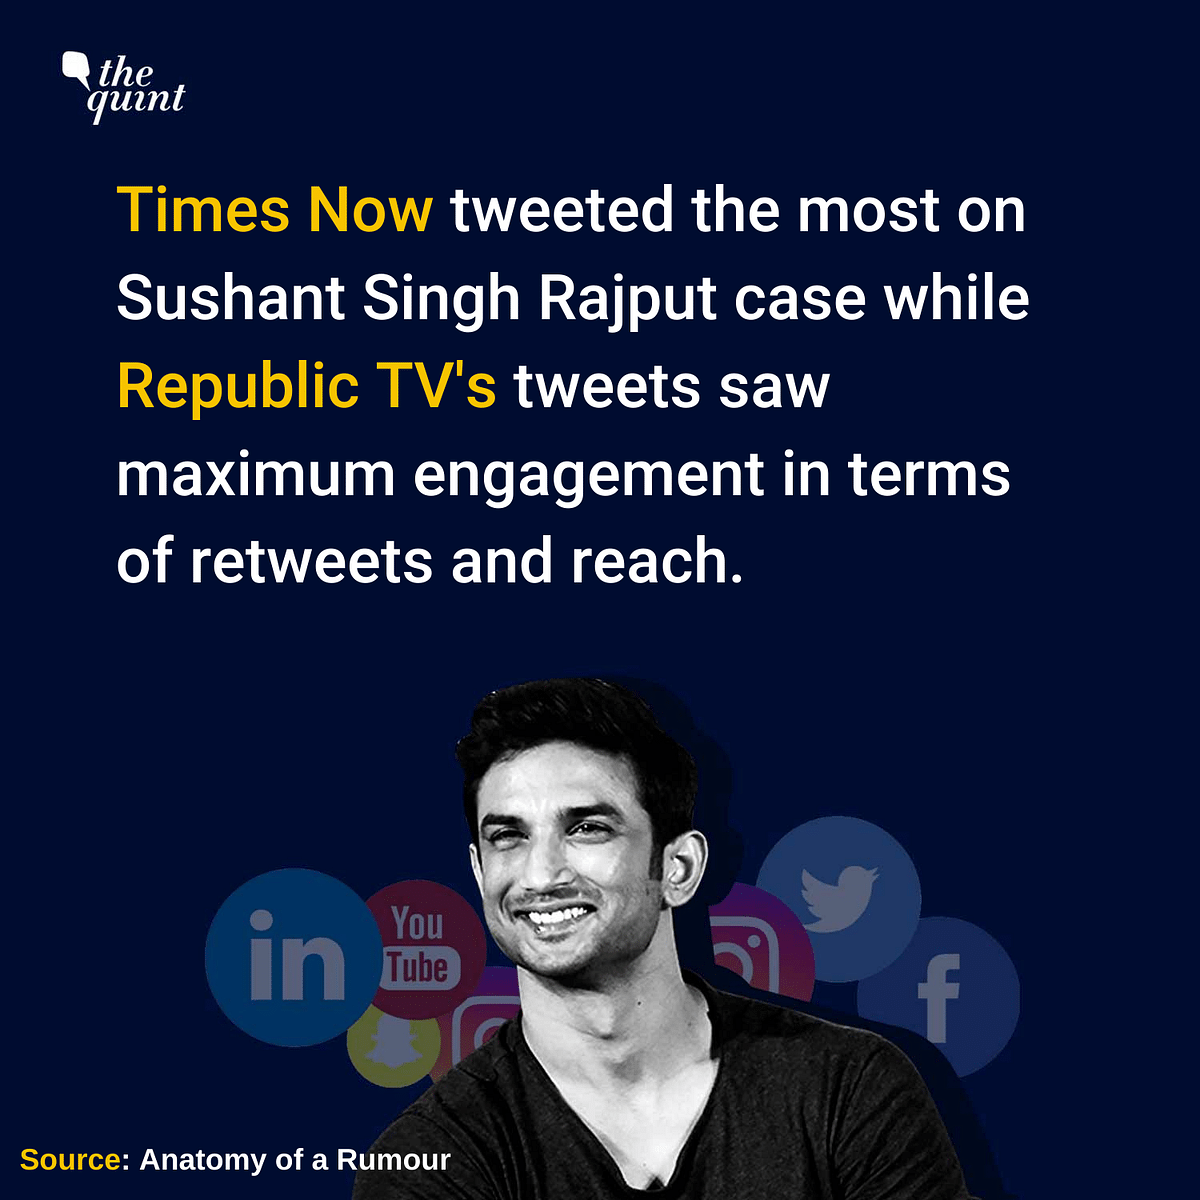 Here’s an analysis of all the social media keywords and hashtags used to talk about Sushant Singh Rajput death case.